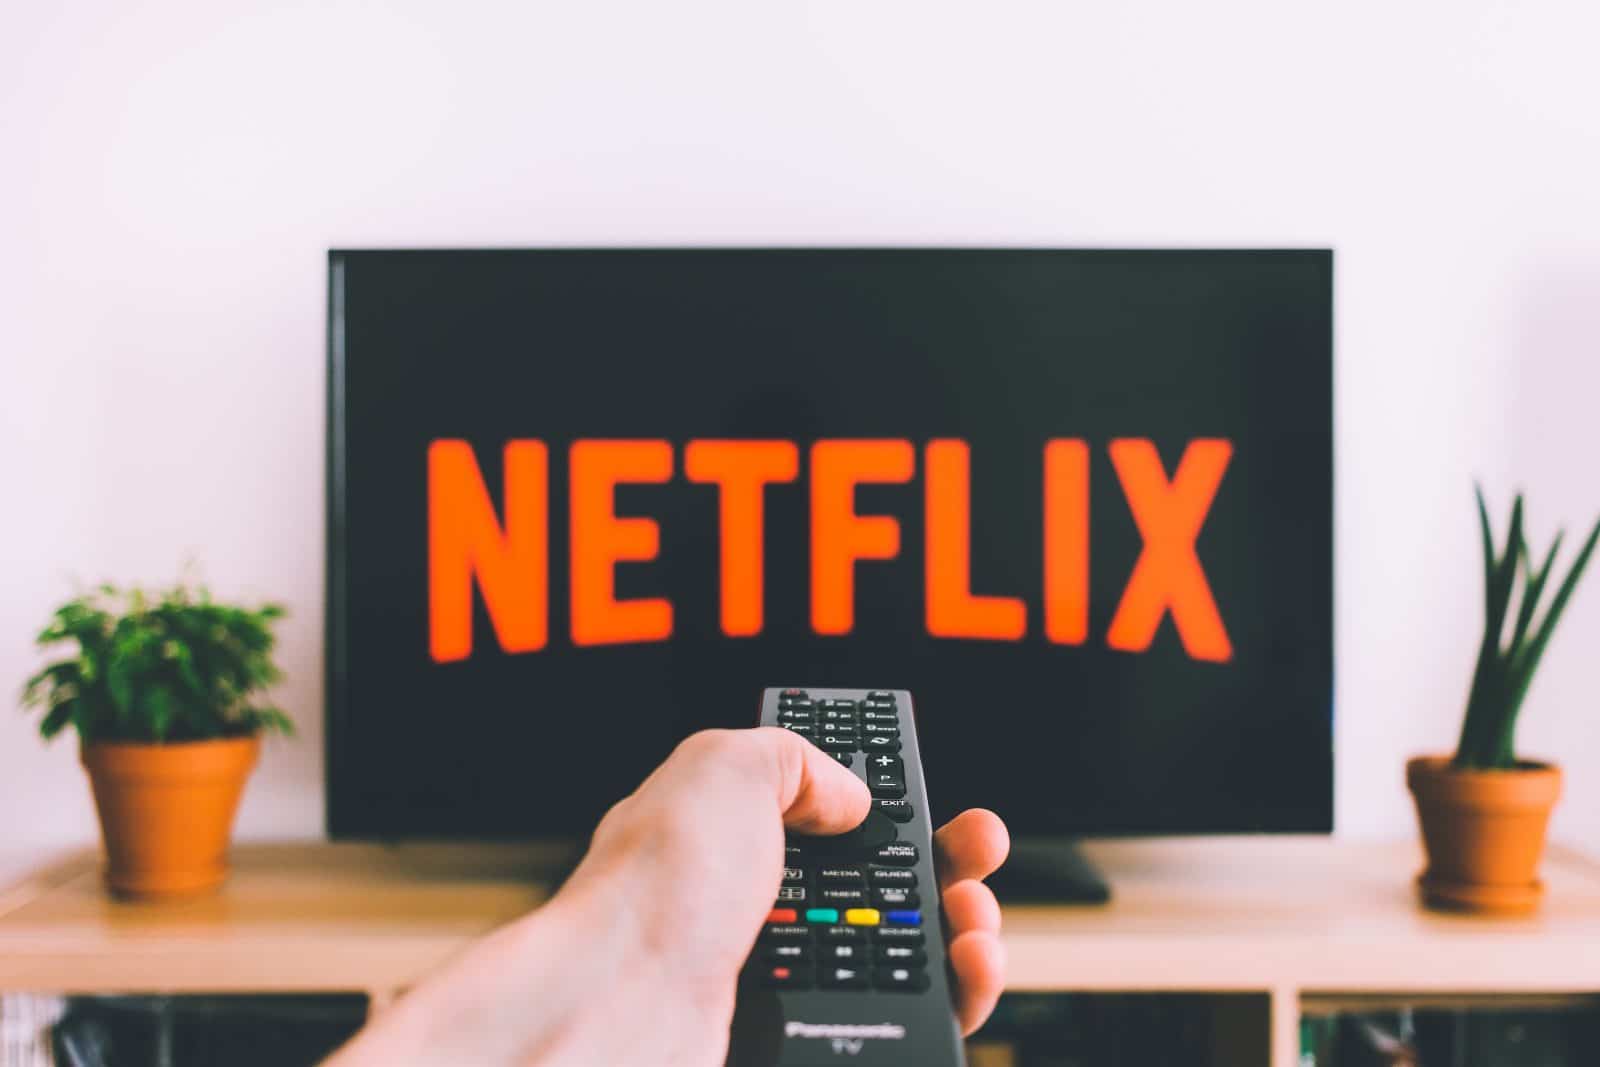 How to avoid the Netflix price increase